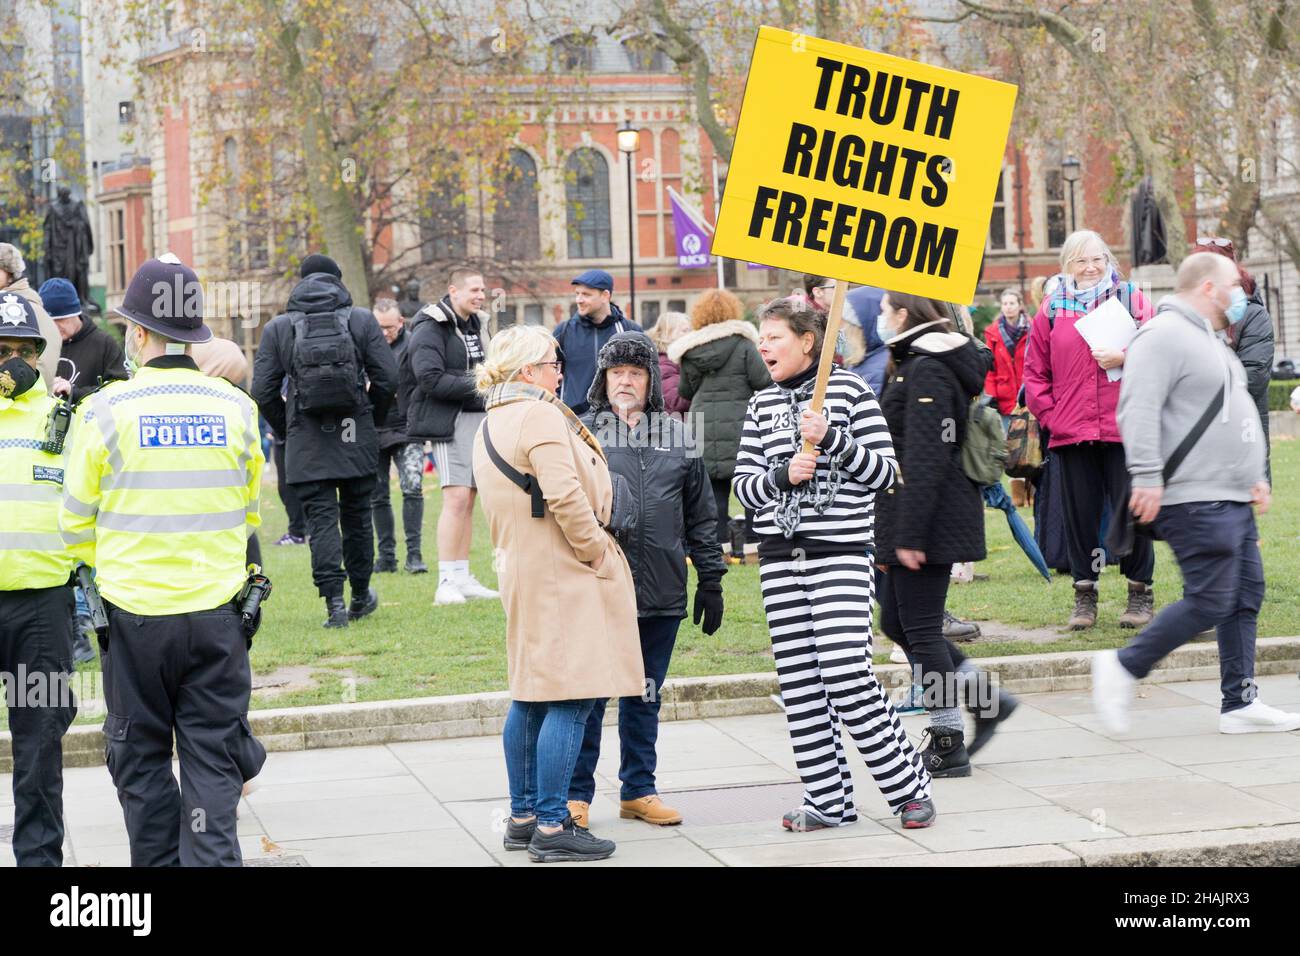 London Westminster UK.  13 December 2021. Protesters gathered outside the House of Parliament holding various messages on placard, with heavy police present keeping law and order. Credit: Xiu Bao/Alamy Live News Stock Photo